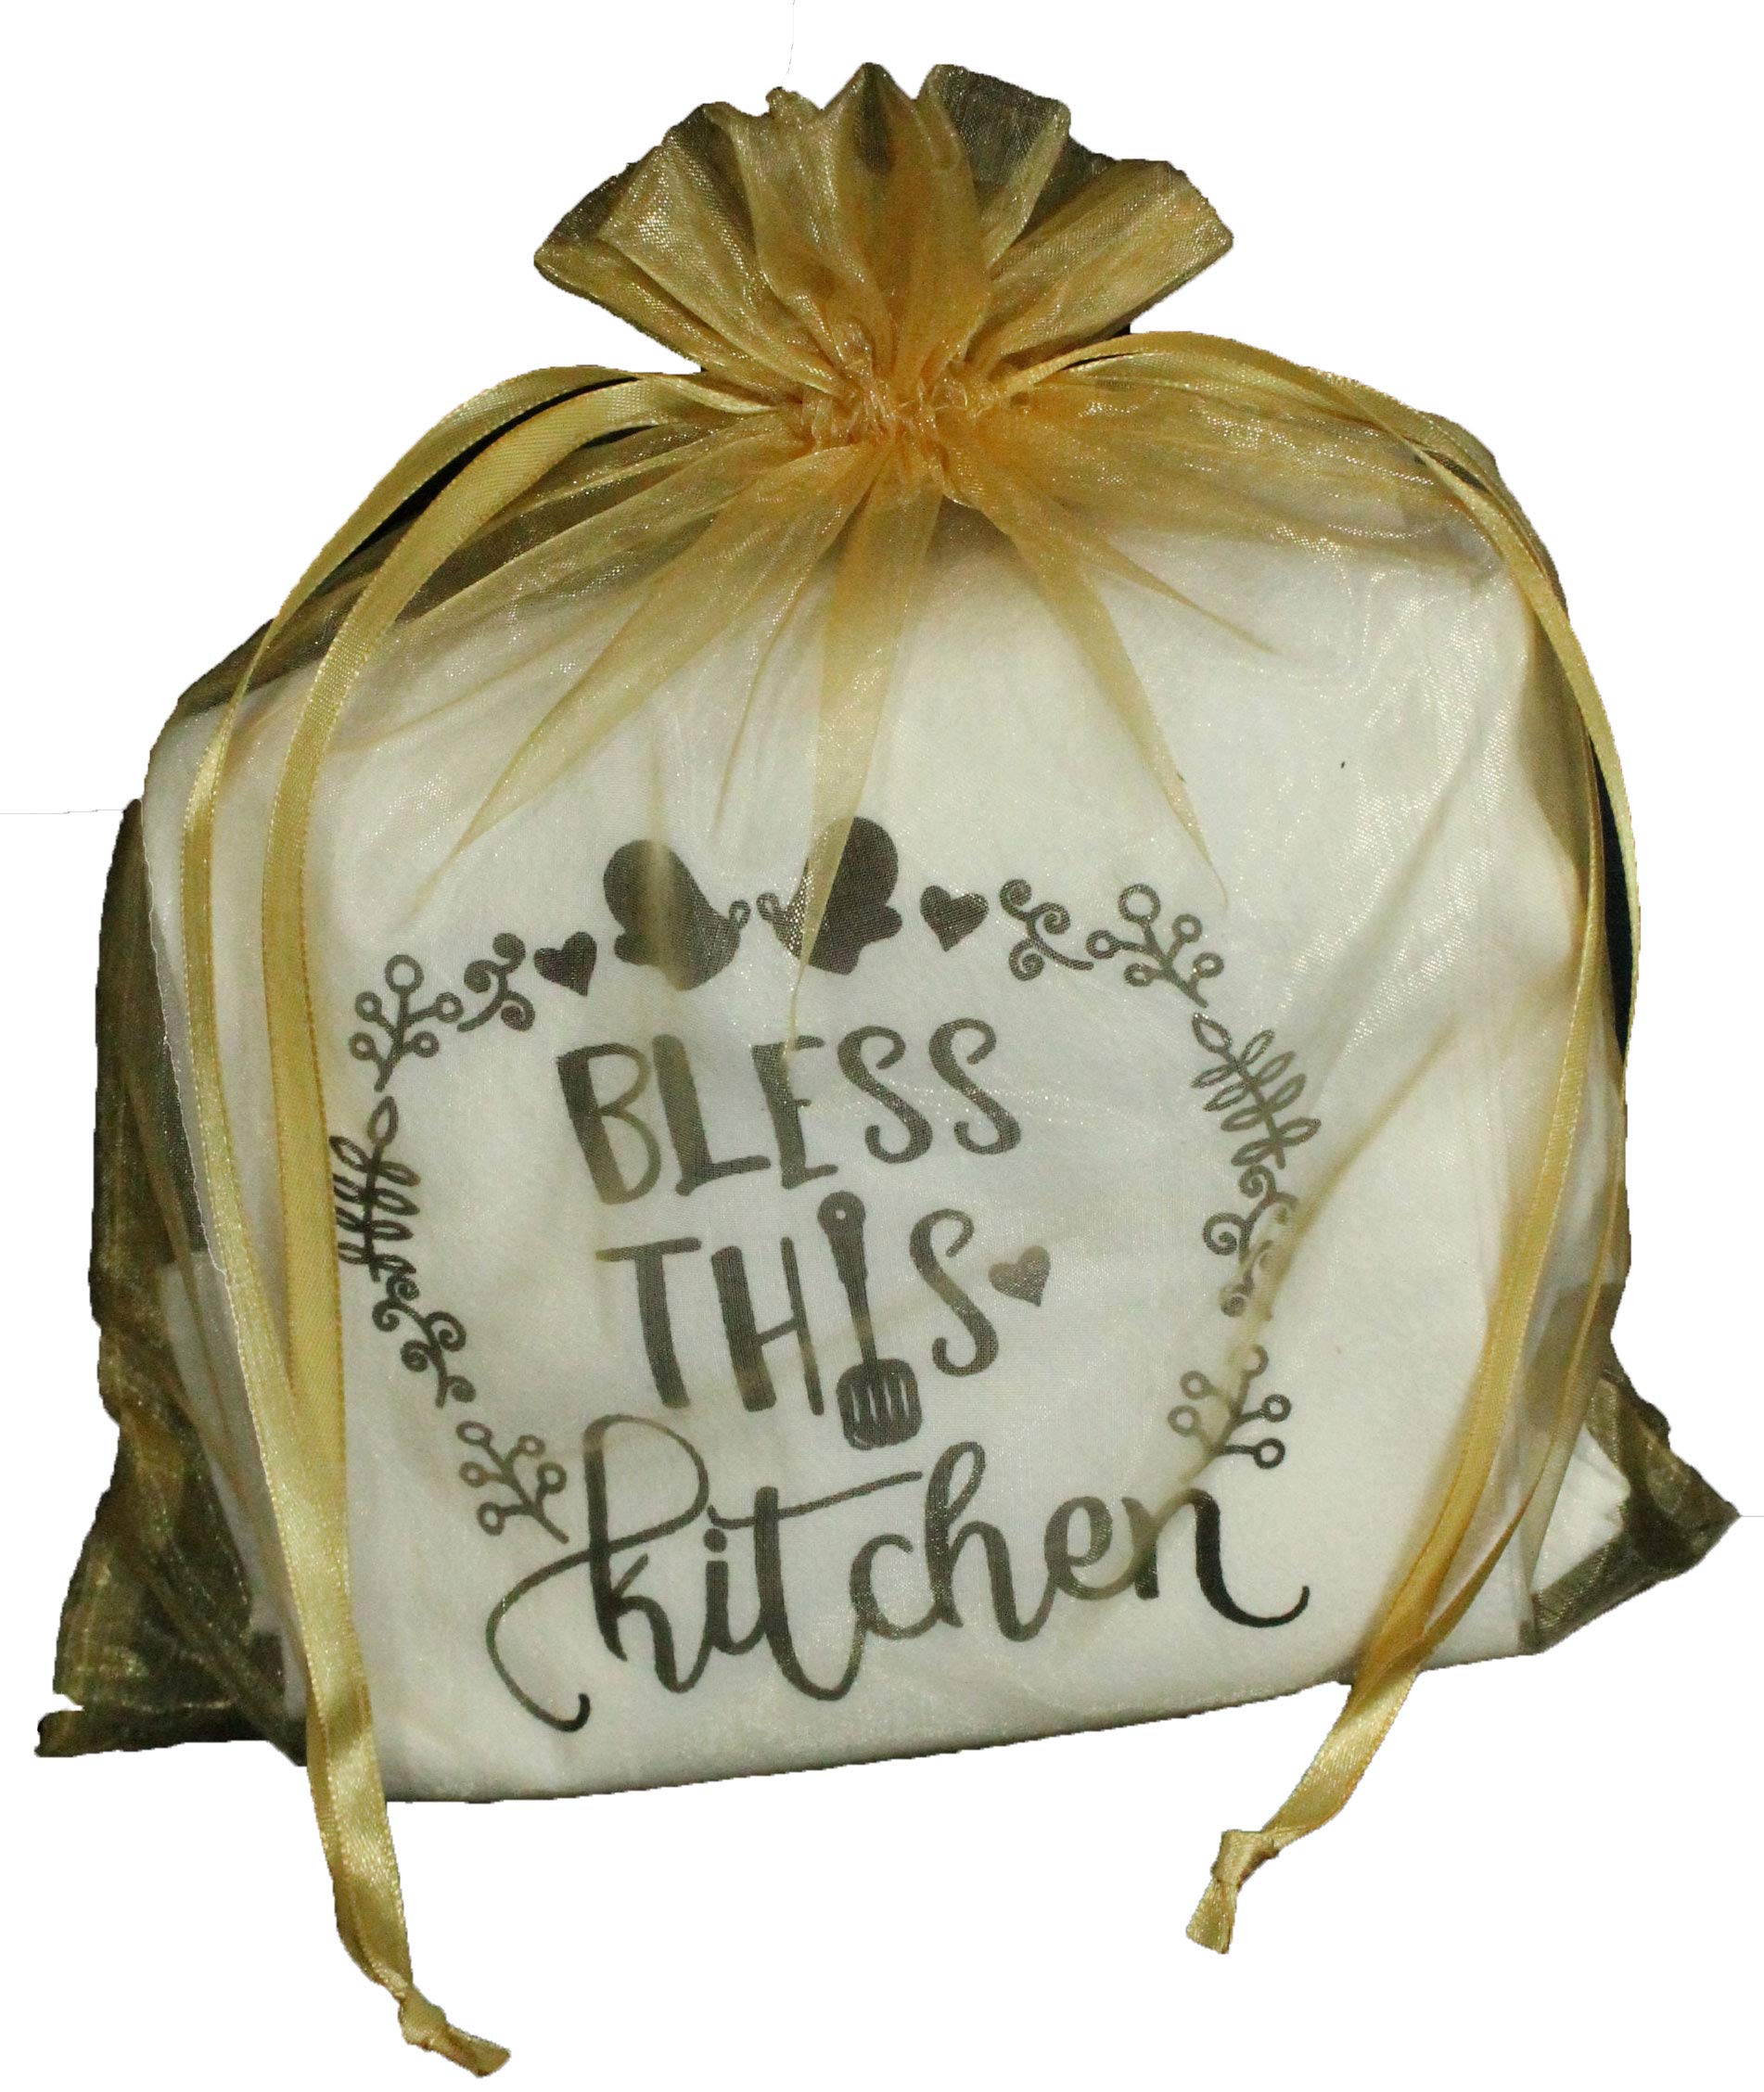 Set of 5 Sentiment Kitchen Dish Towels - Teacher Gift, Christmas Gift for Women, Hostess Gift, White Flour Sack Baking and Cooking Related Kitchen Towels Gift Set - Comes in Organza Gift Bag